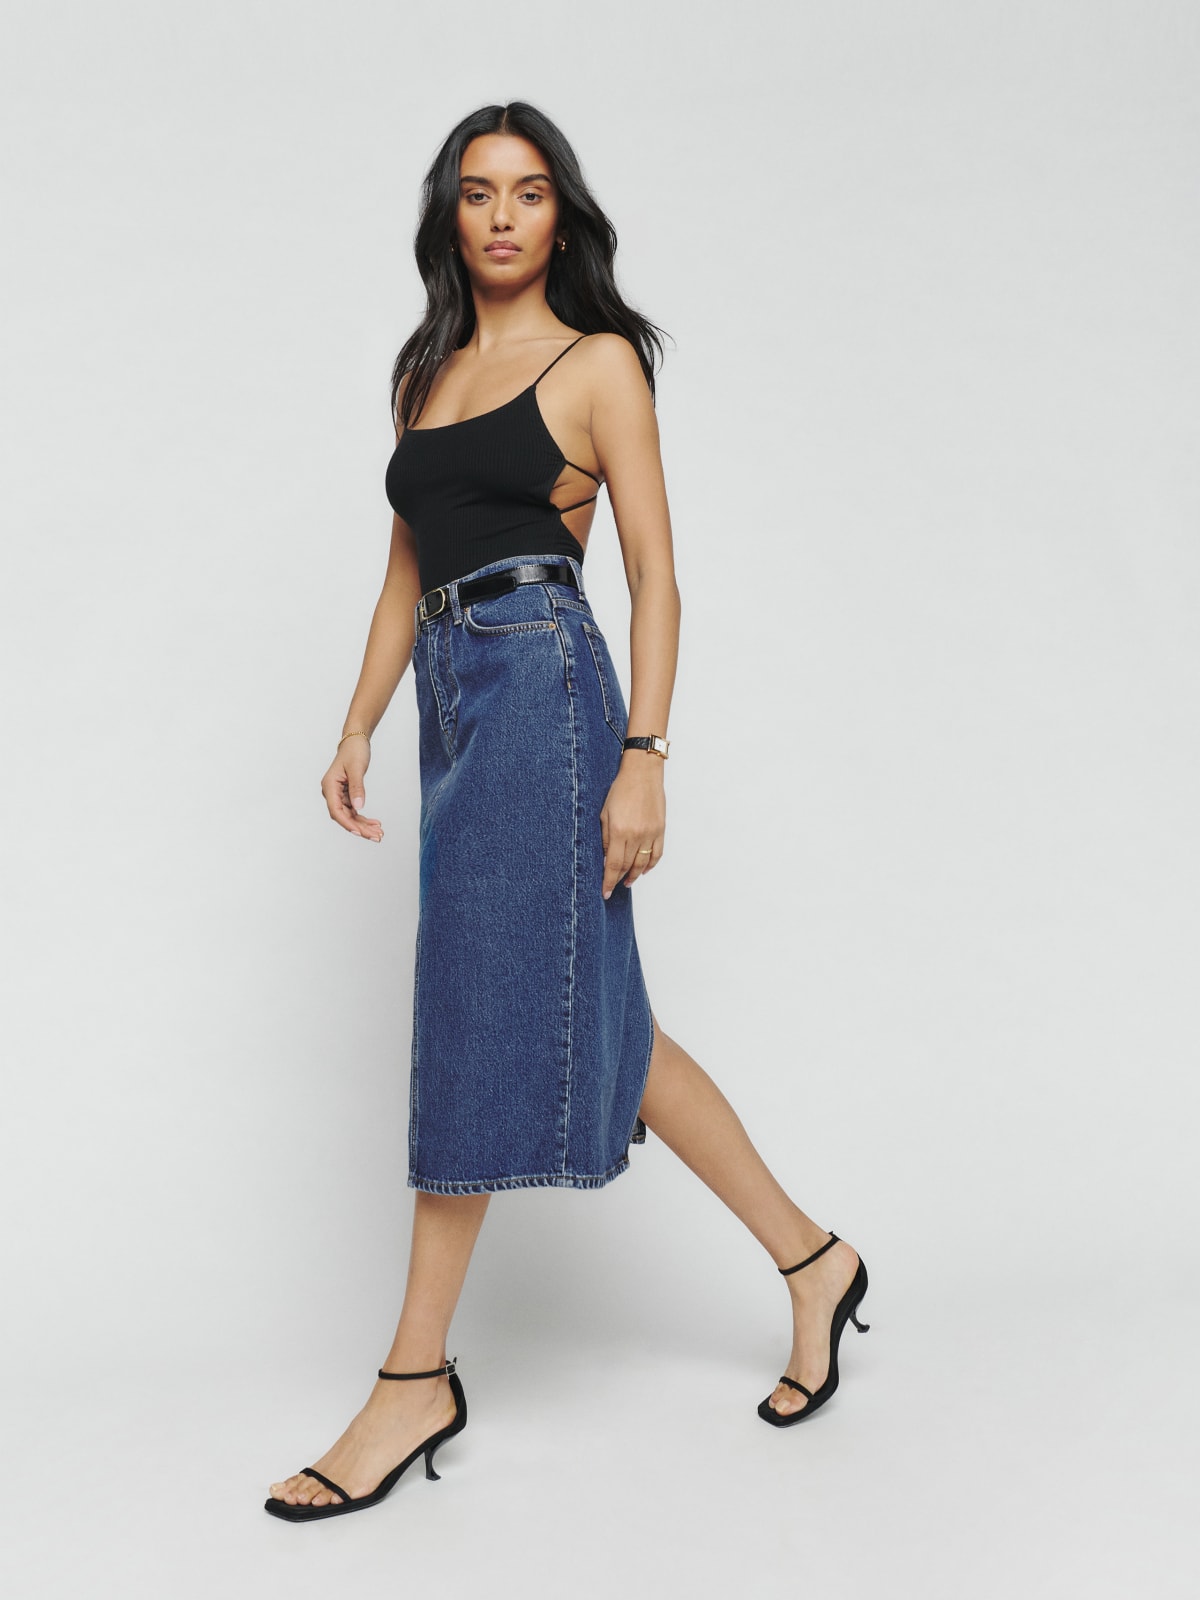 How to create 4 looks with an on-trend denim maxi skirt - Good Morning ...